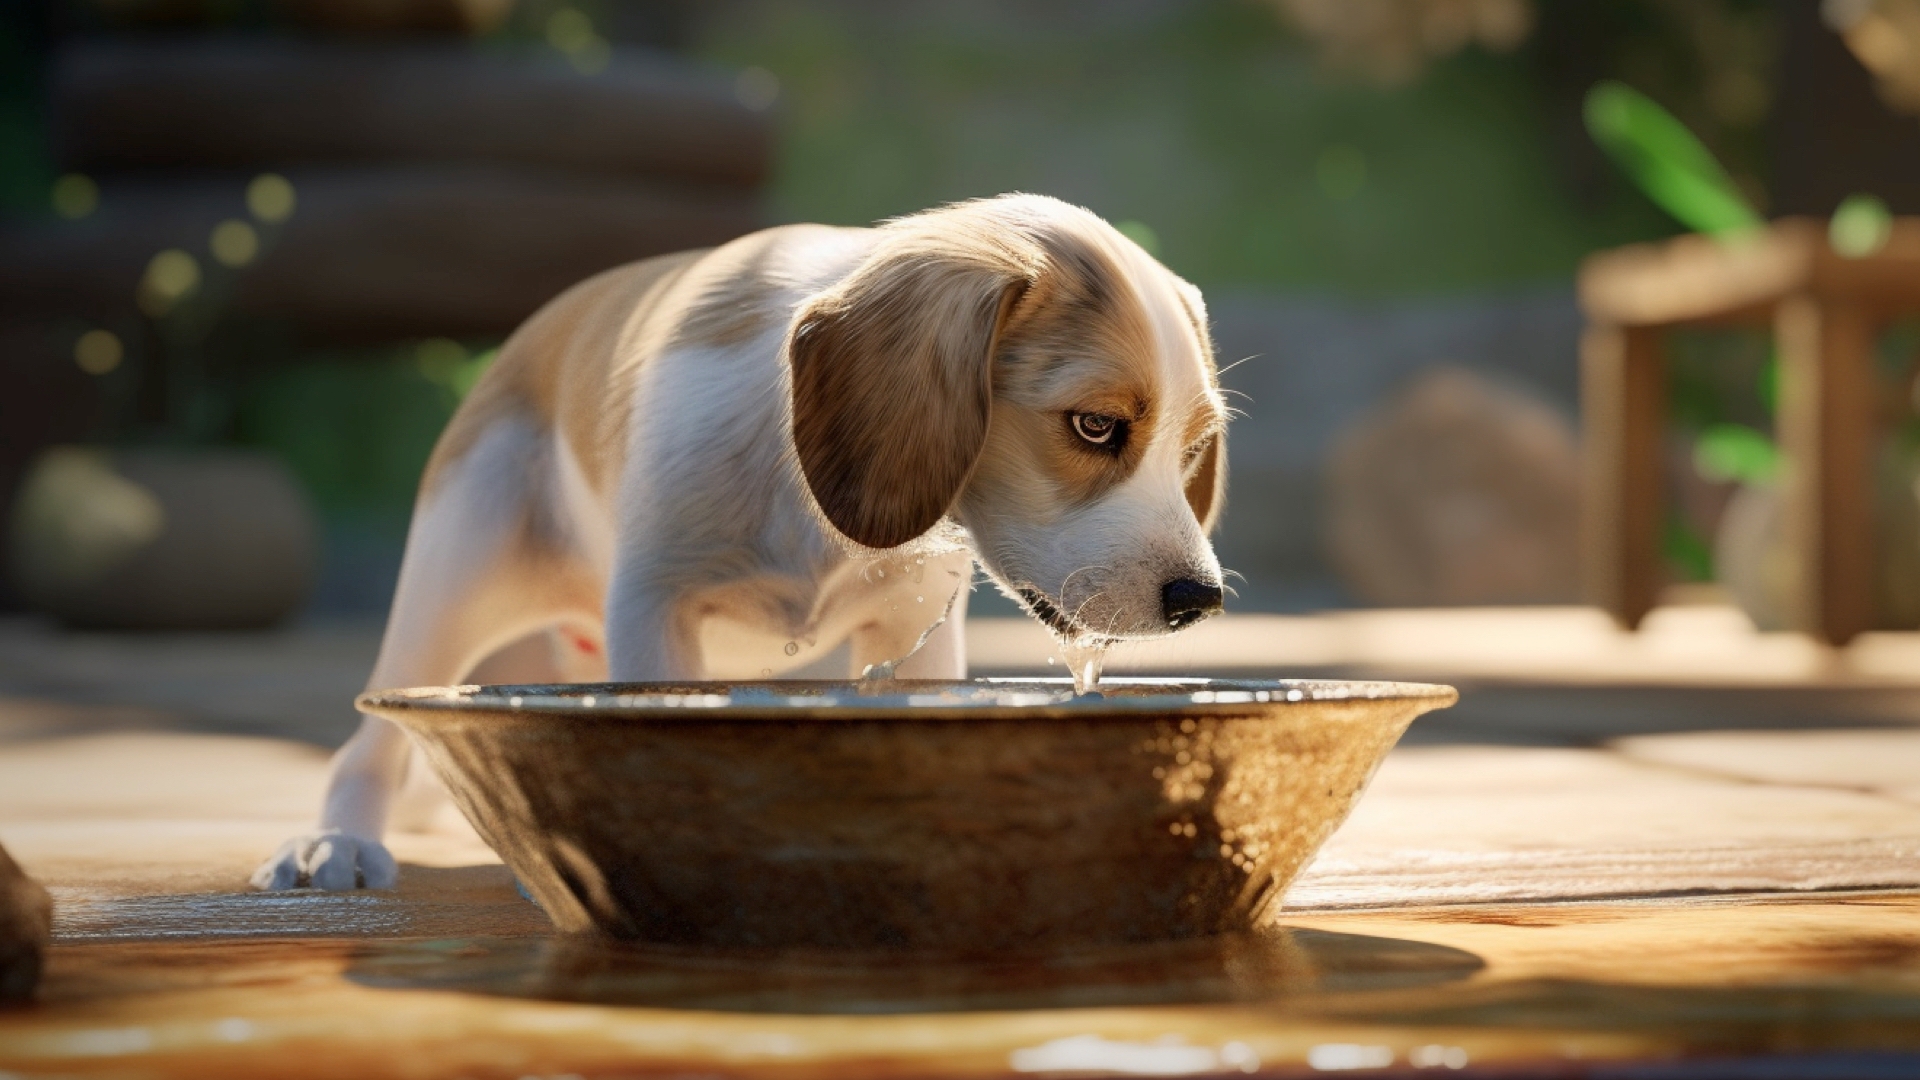 Hot Tips for Keeping Your Furry Friend Cool and Happy This Summer